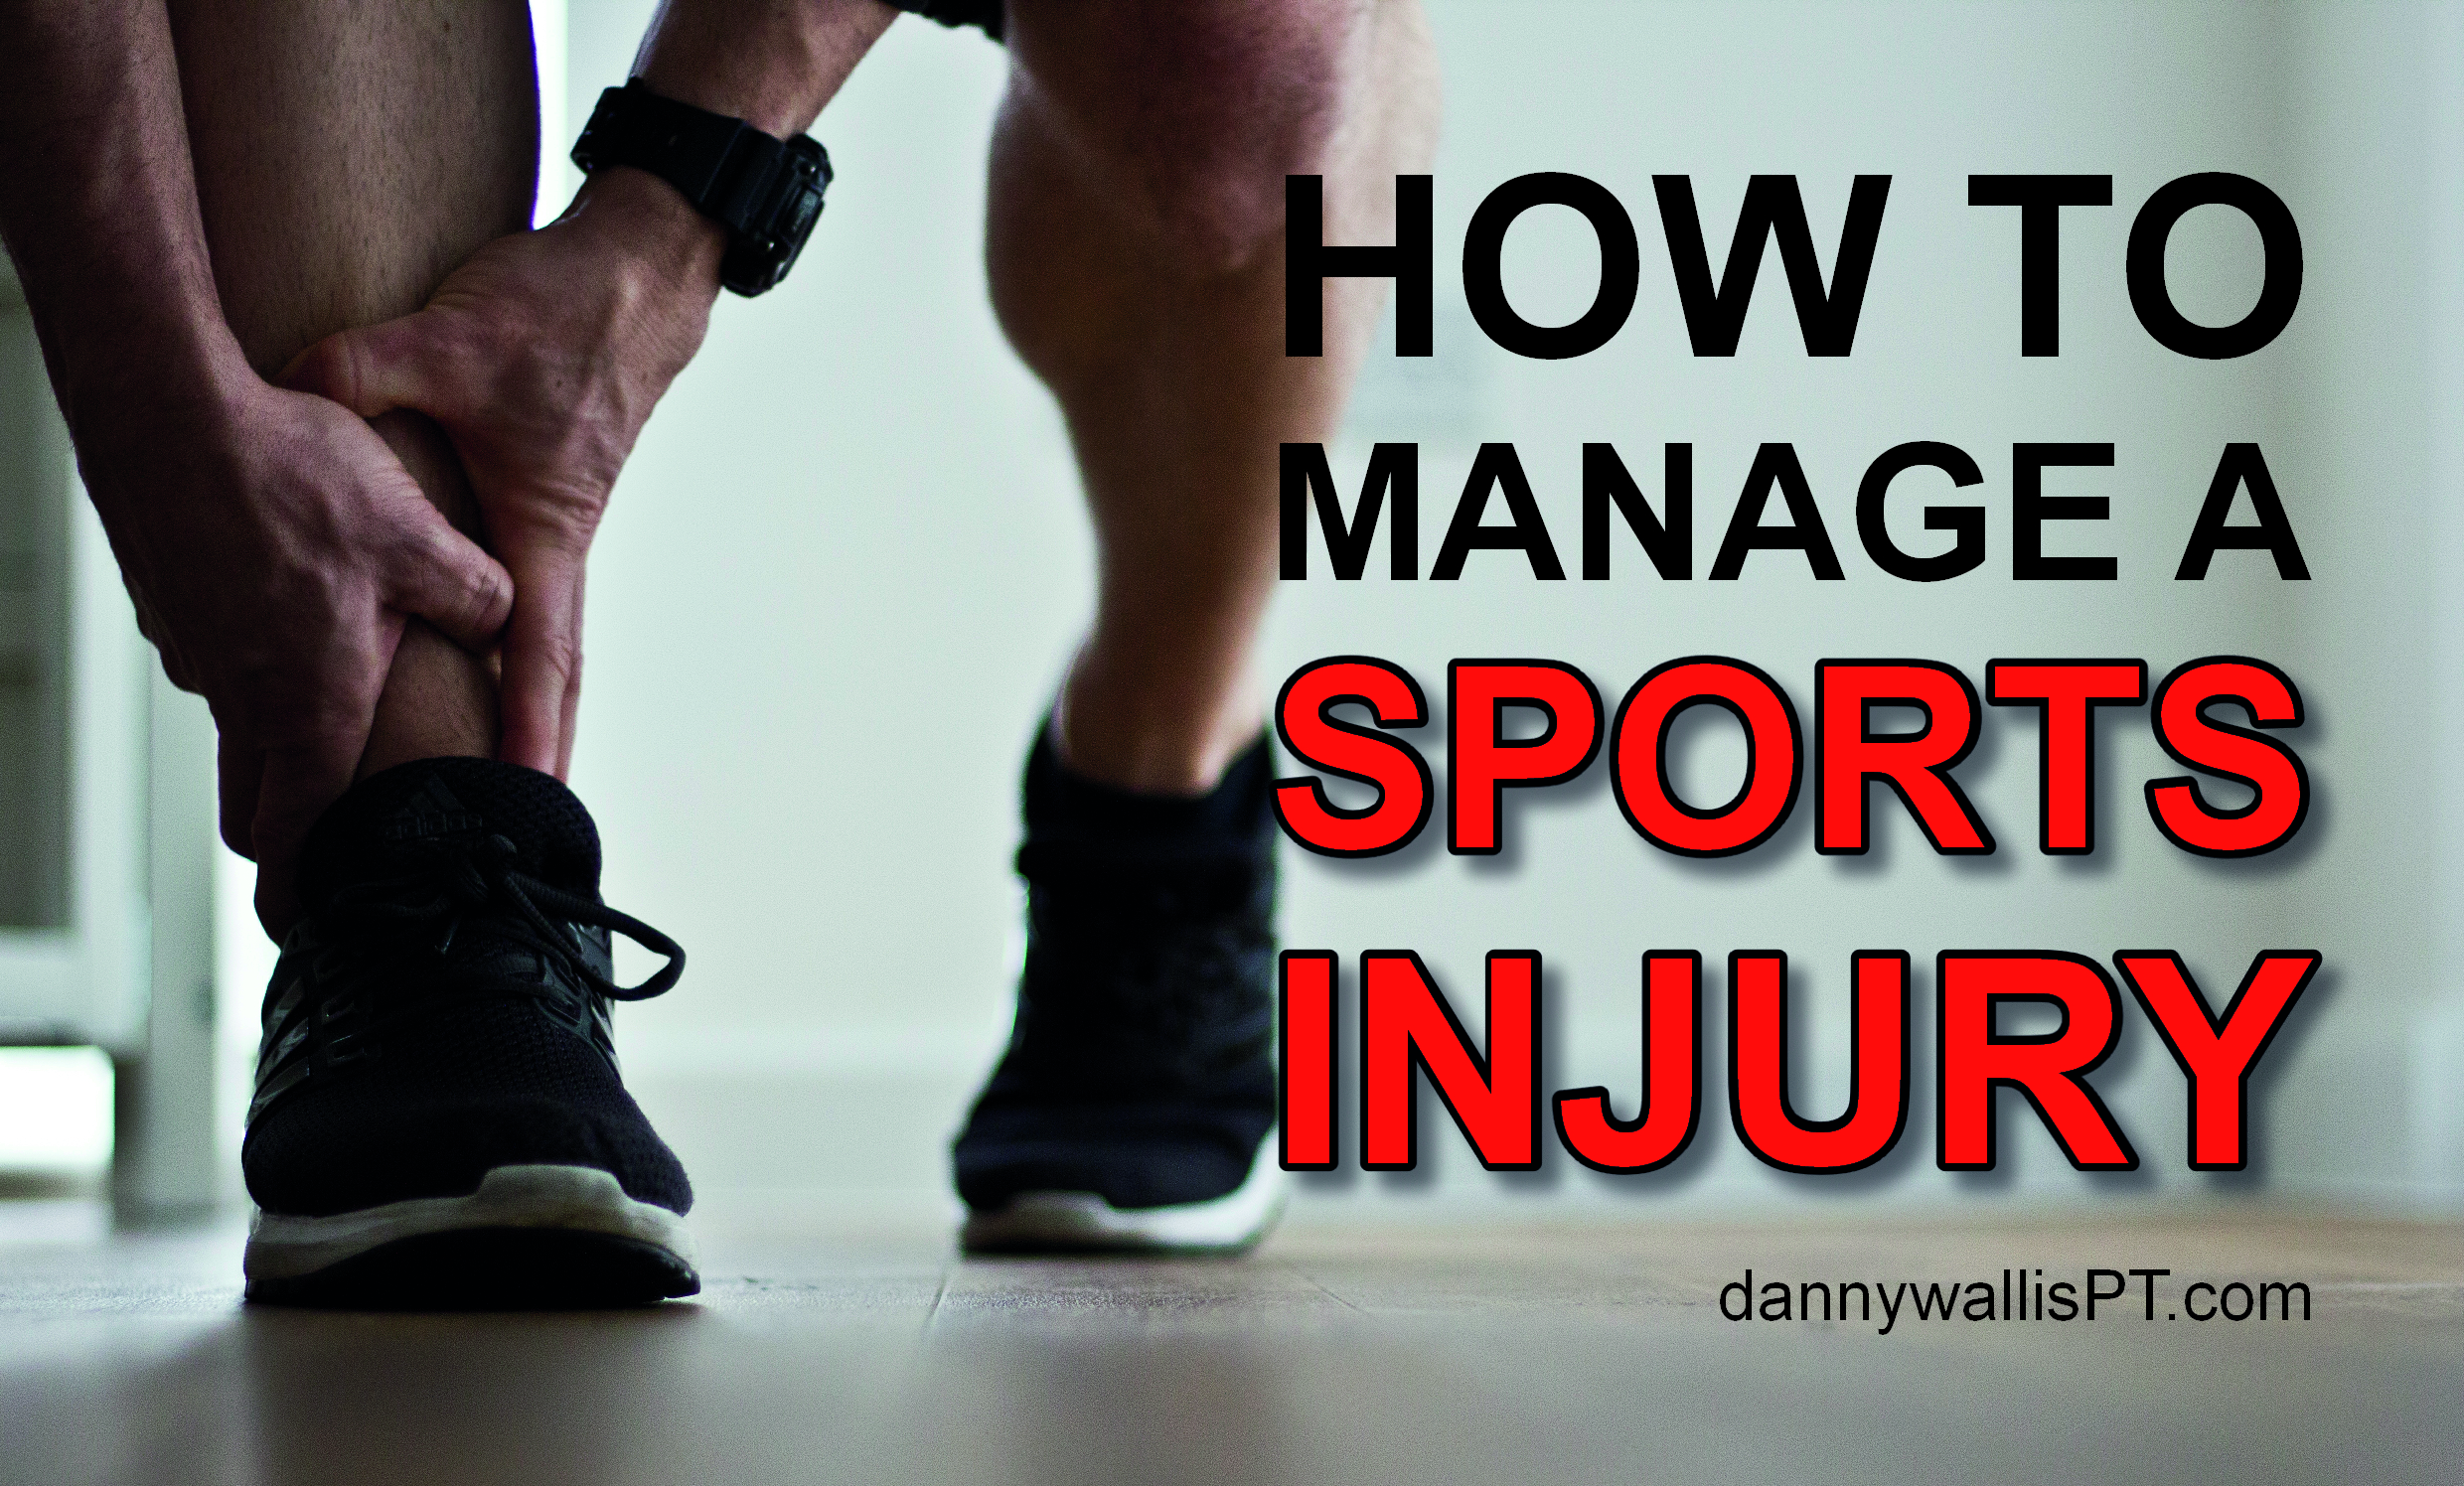 How to manage a sports injury